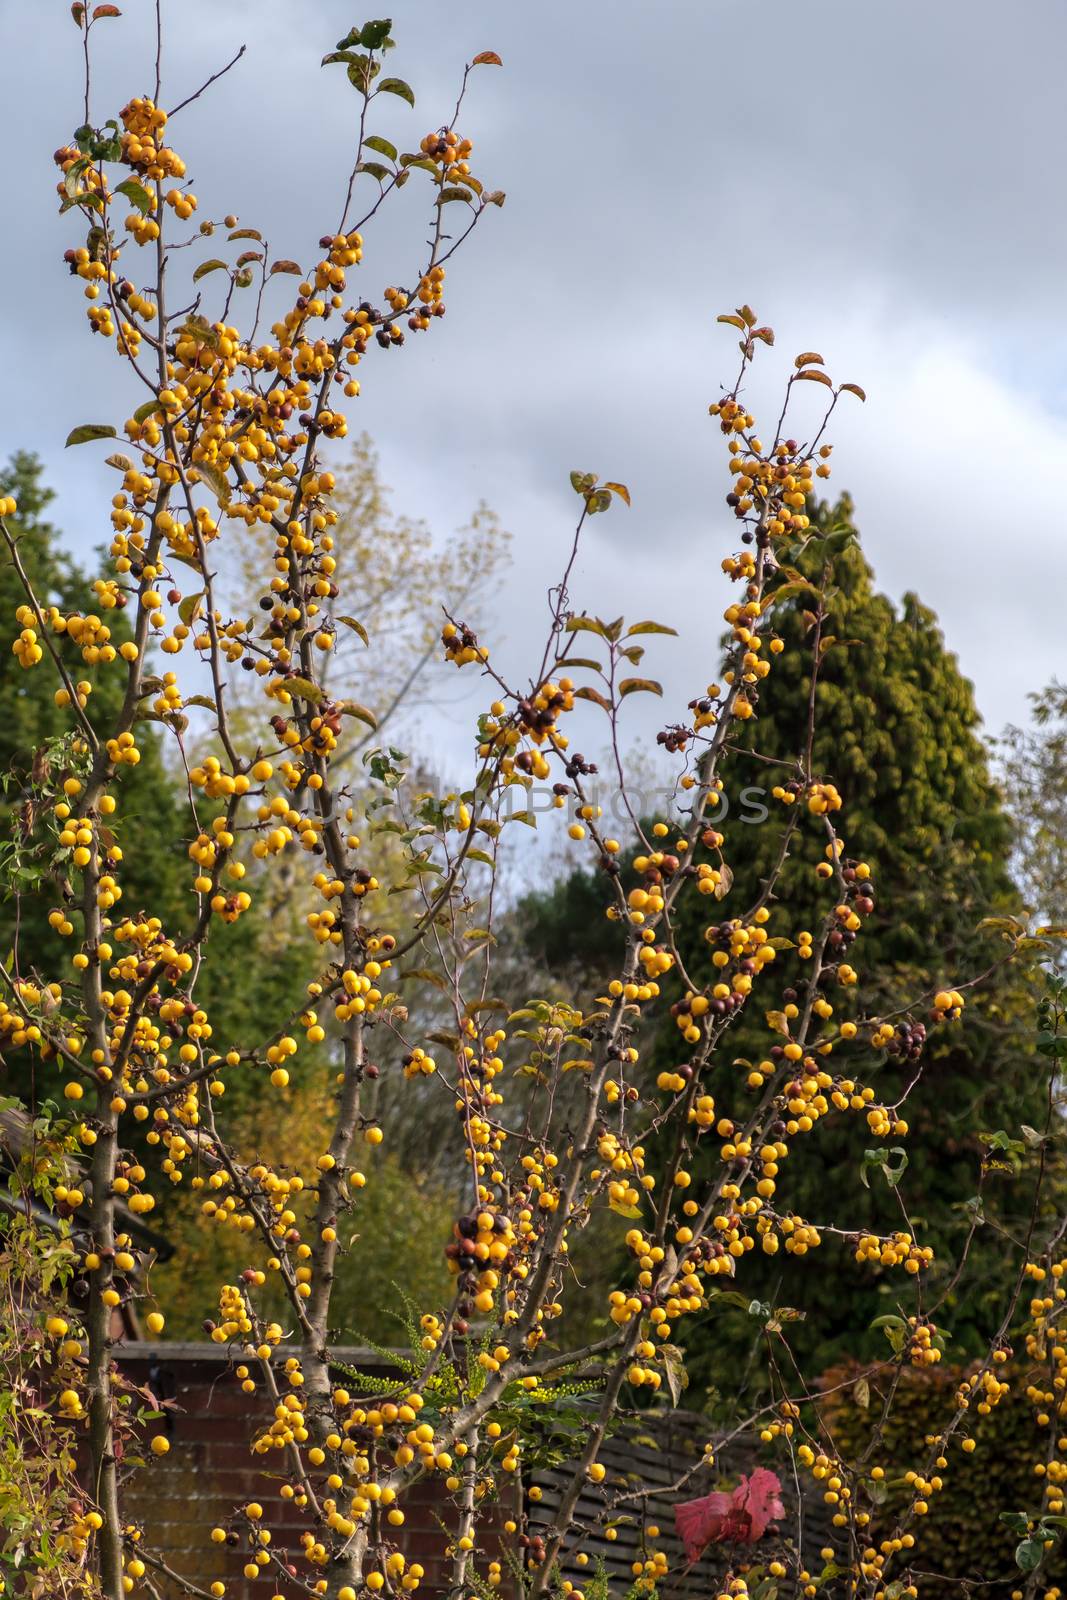 Tree with yellow berries and thorny branches in East Grinstead by phil_bird